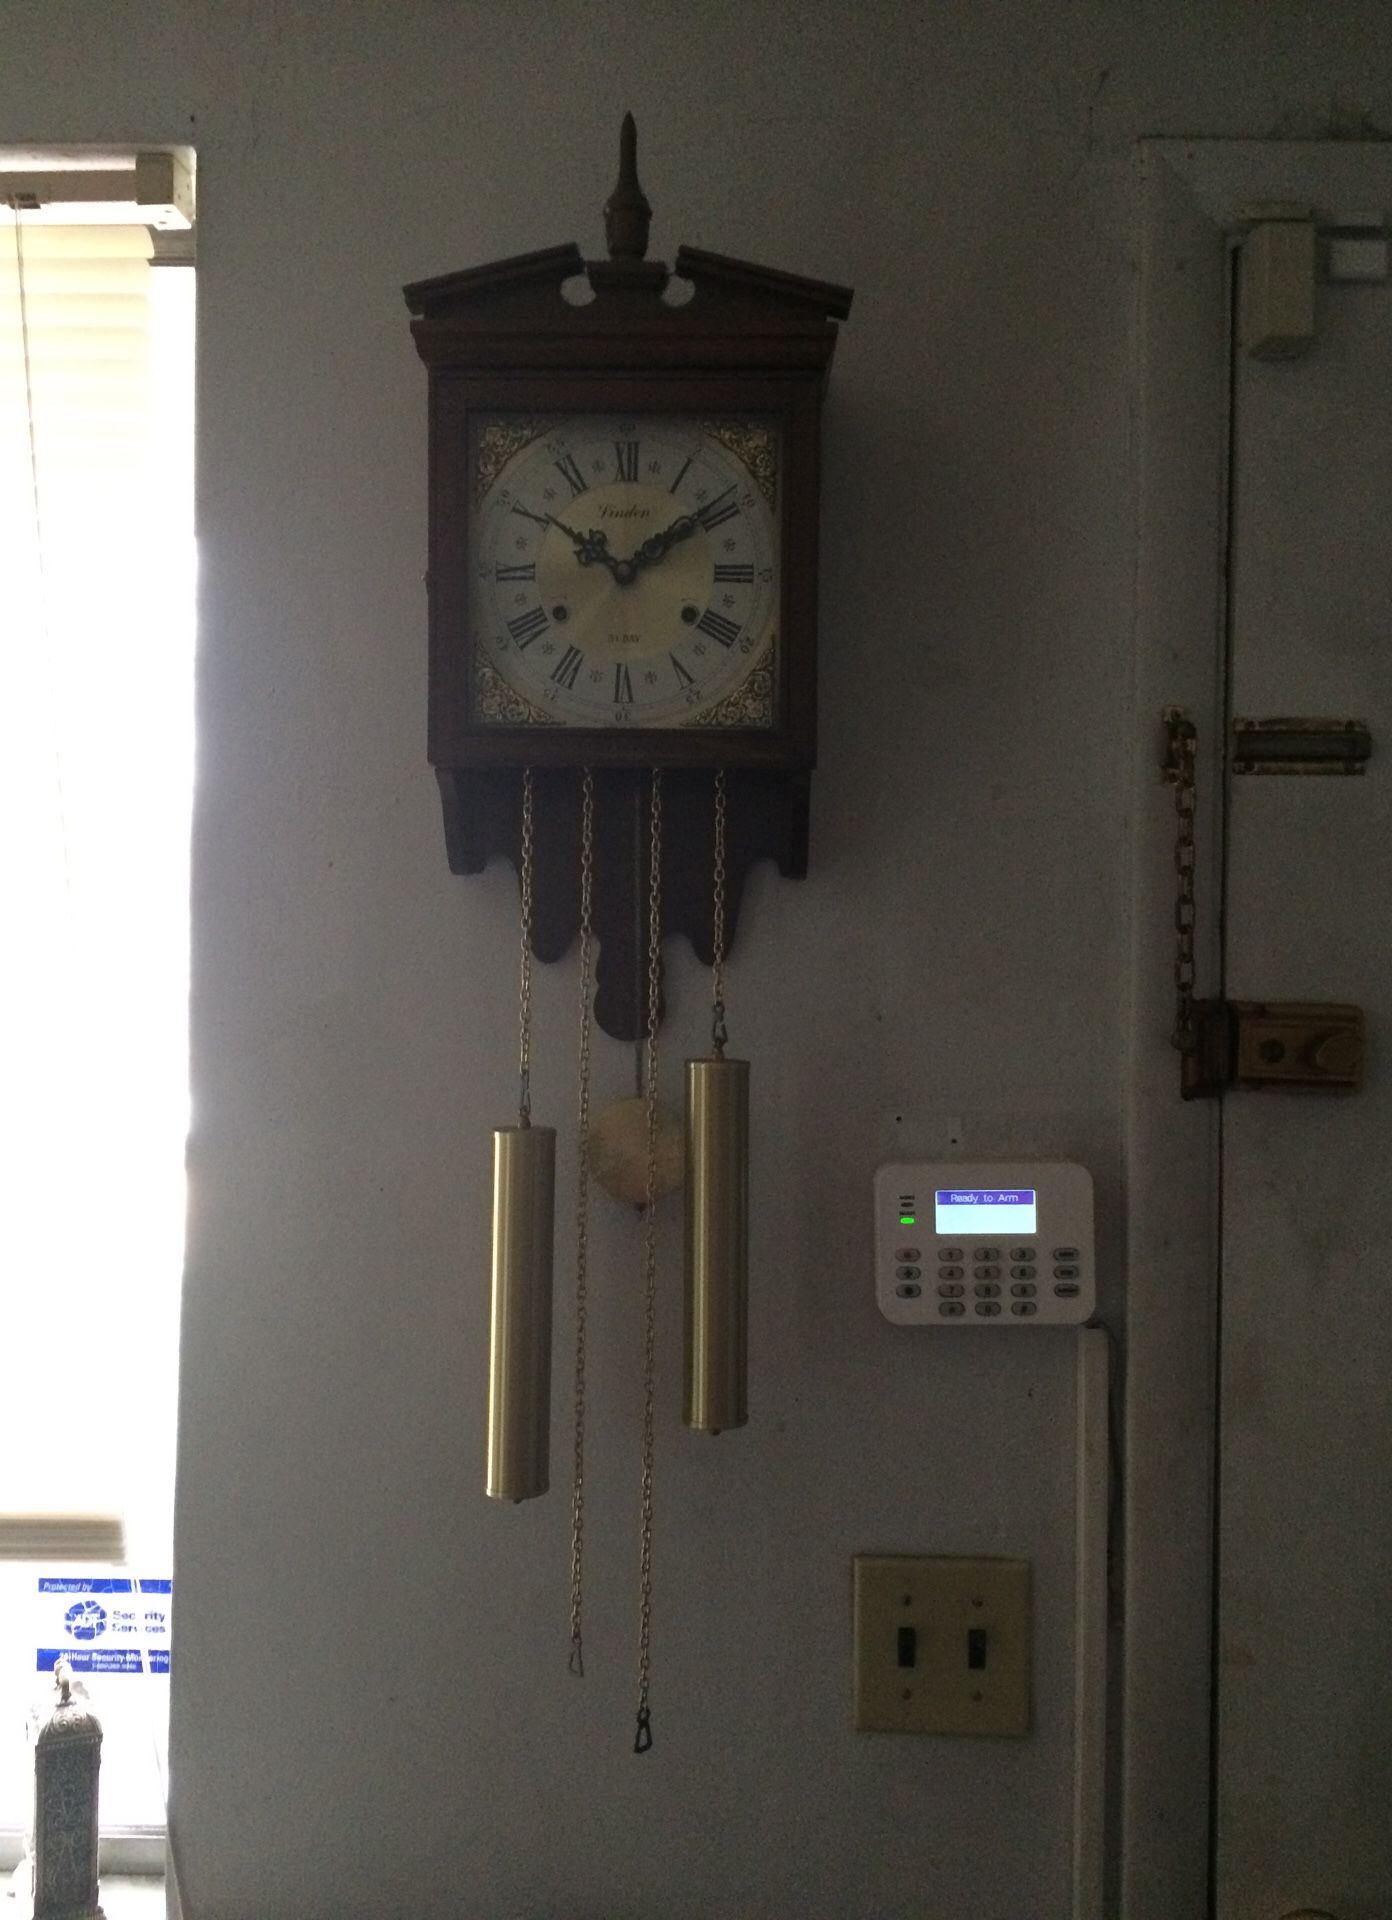 Lovely antique wall clock